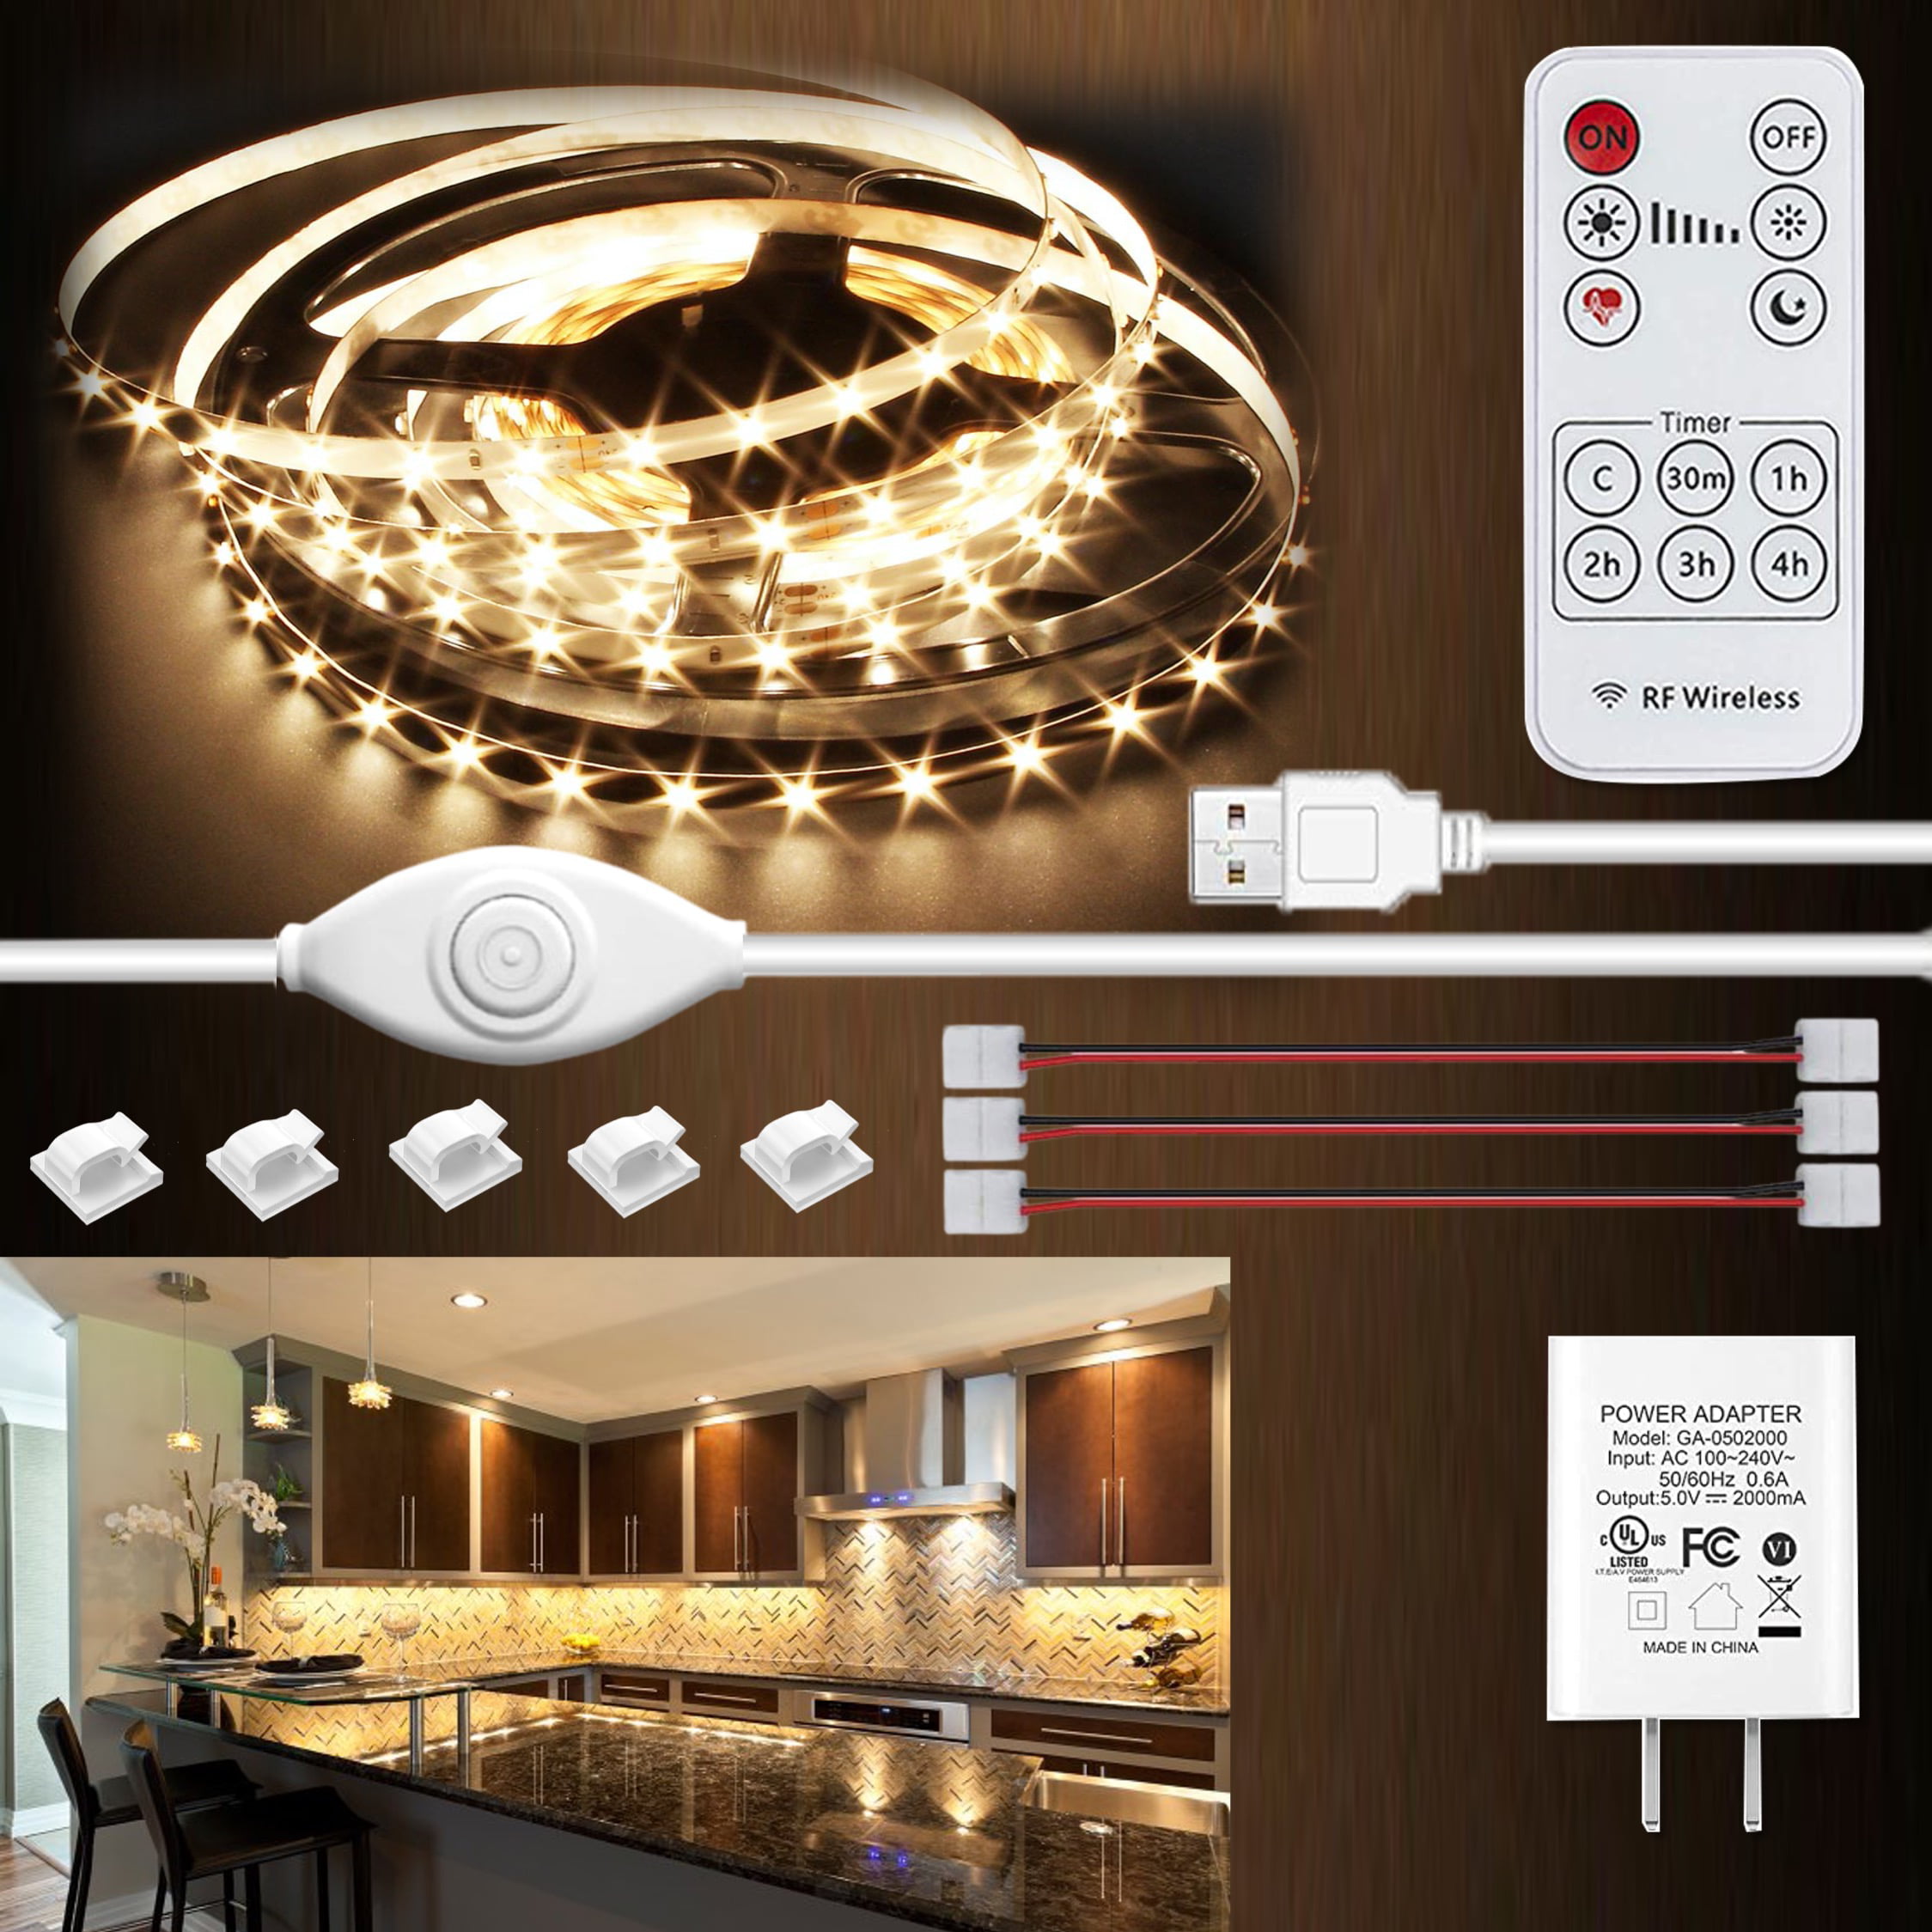 6500K White Under Cabinet Lights Flexible 6 PCS LED Strip Lights with Remote Control Dimmer and UL Power Adapter Under Cabinet Lighting,,for Showcase,Kitchen,Desk,Shelf,Cupboard 9.8ft 